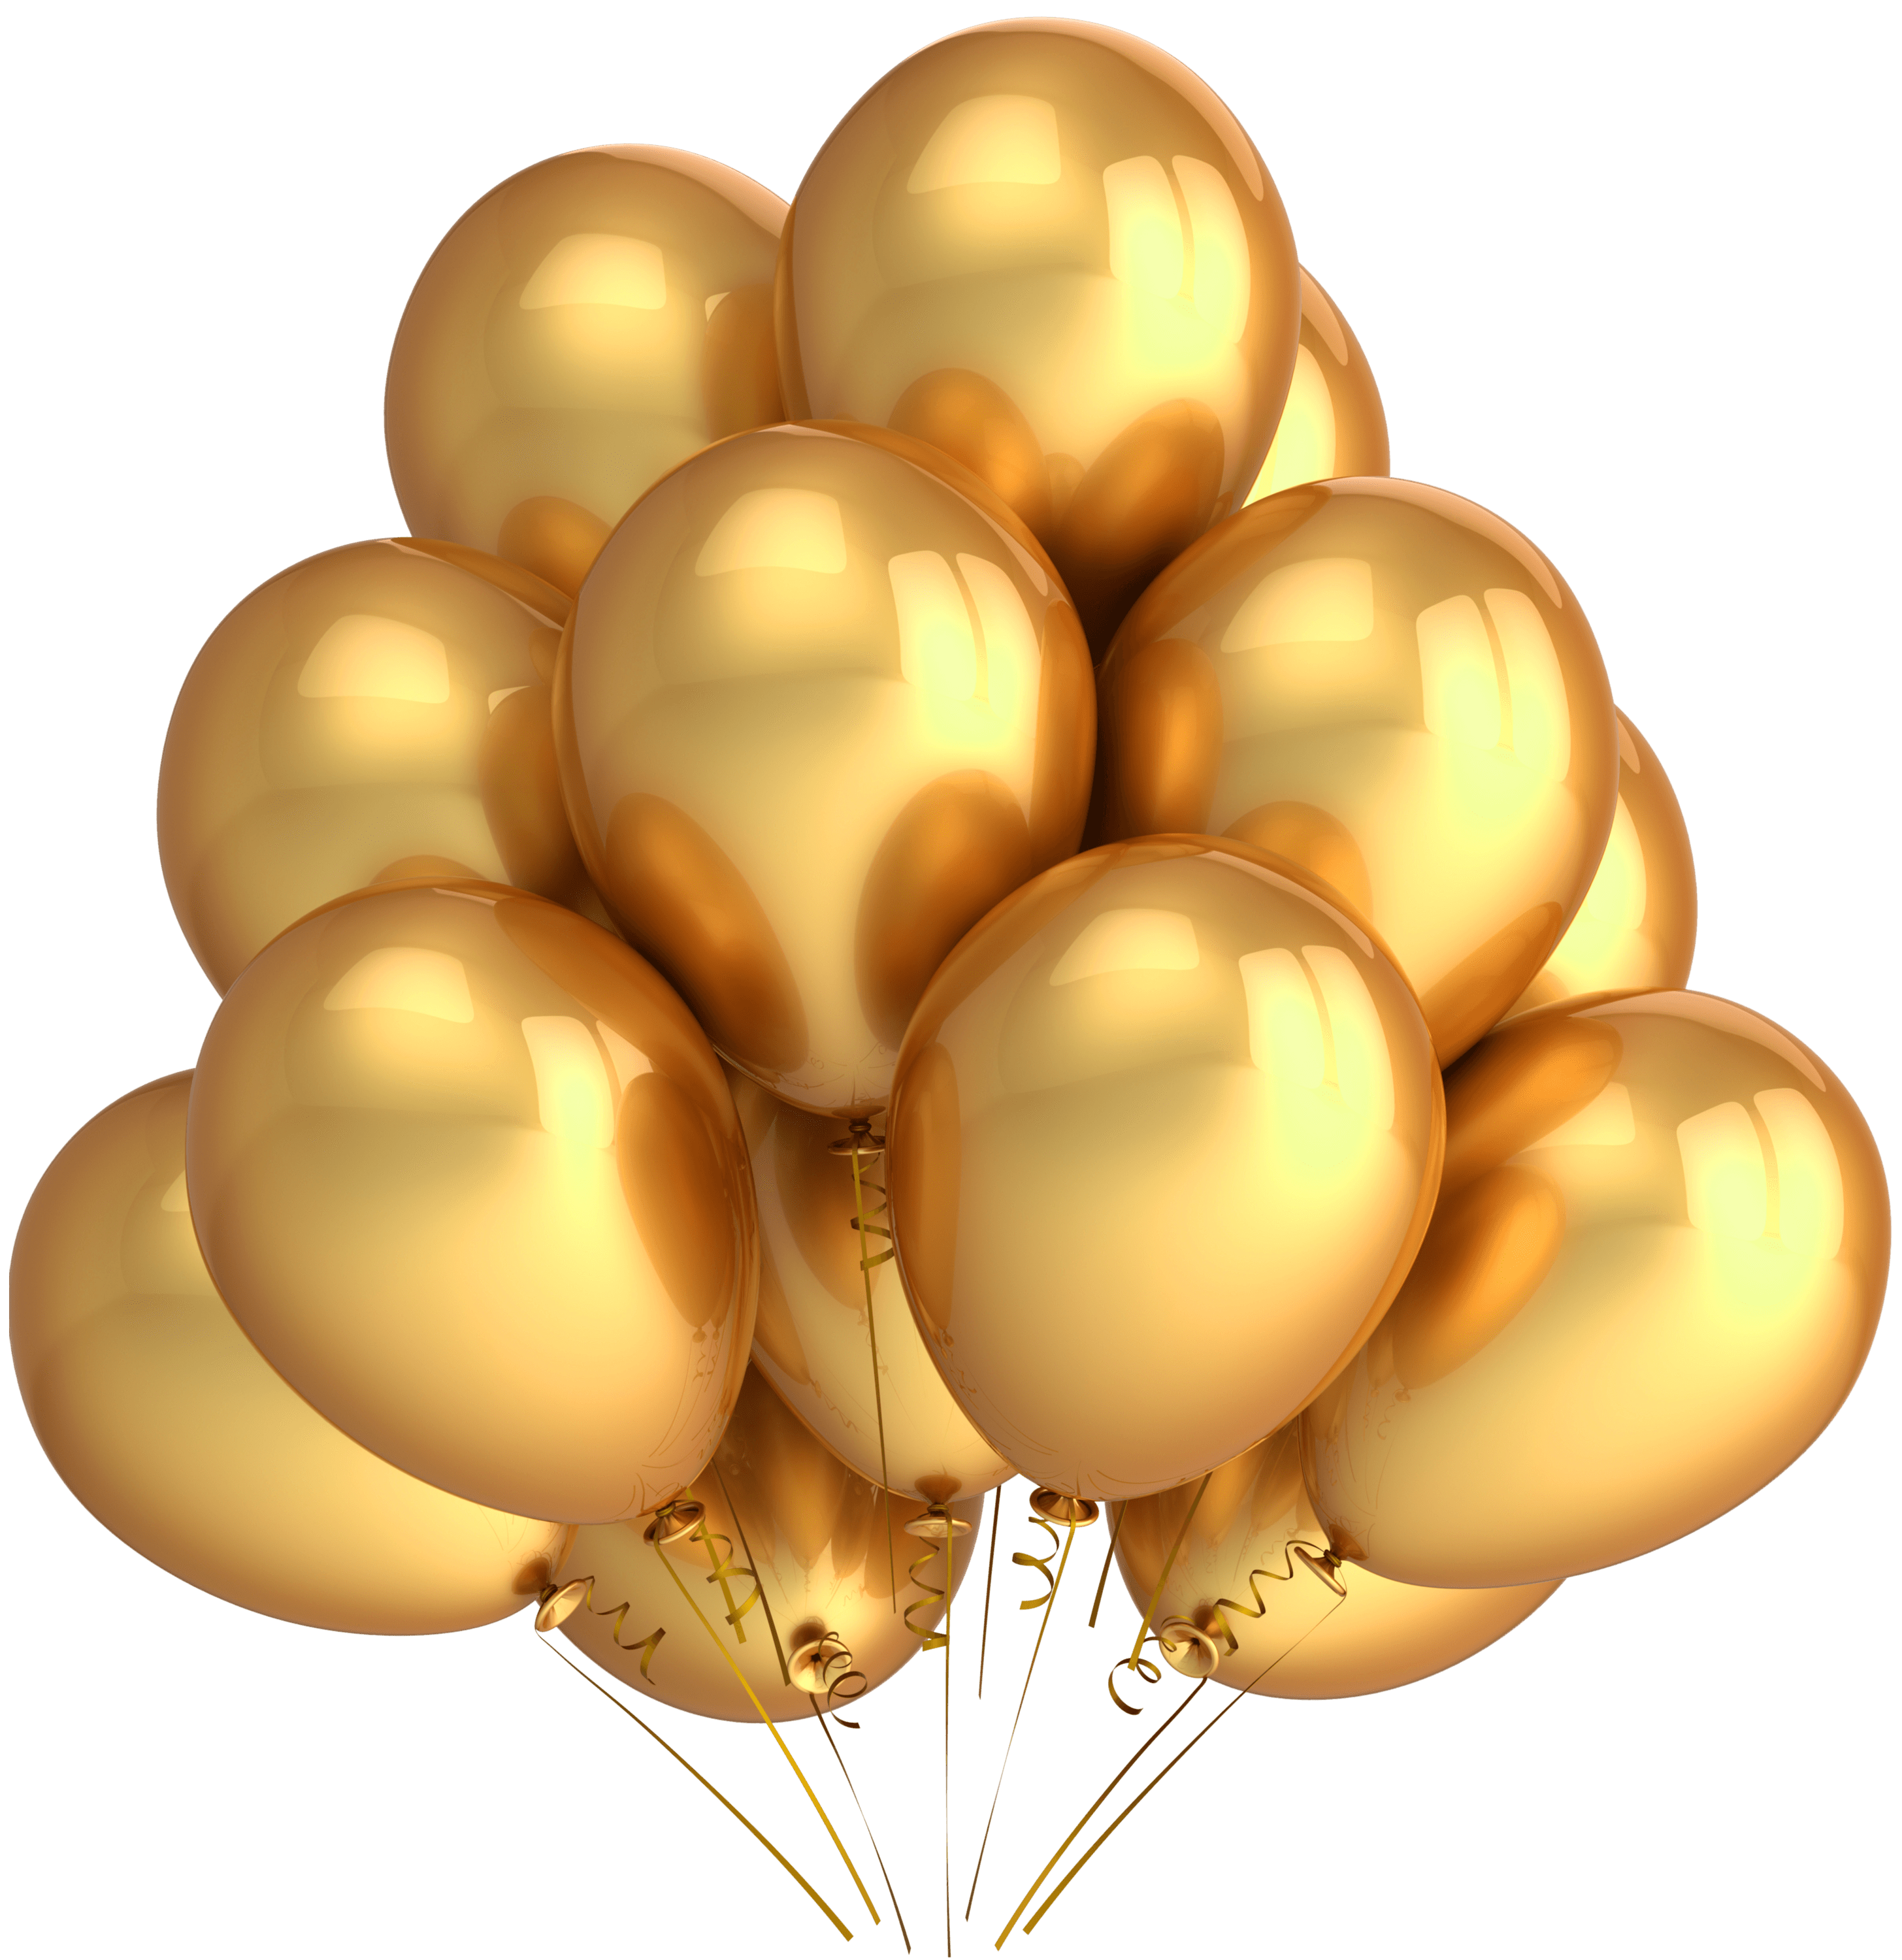 Golden Of Balloons Bunch HQ Image Free PNG Image